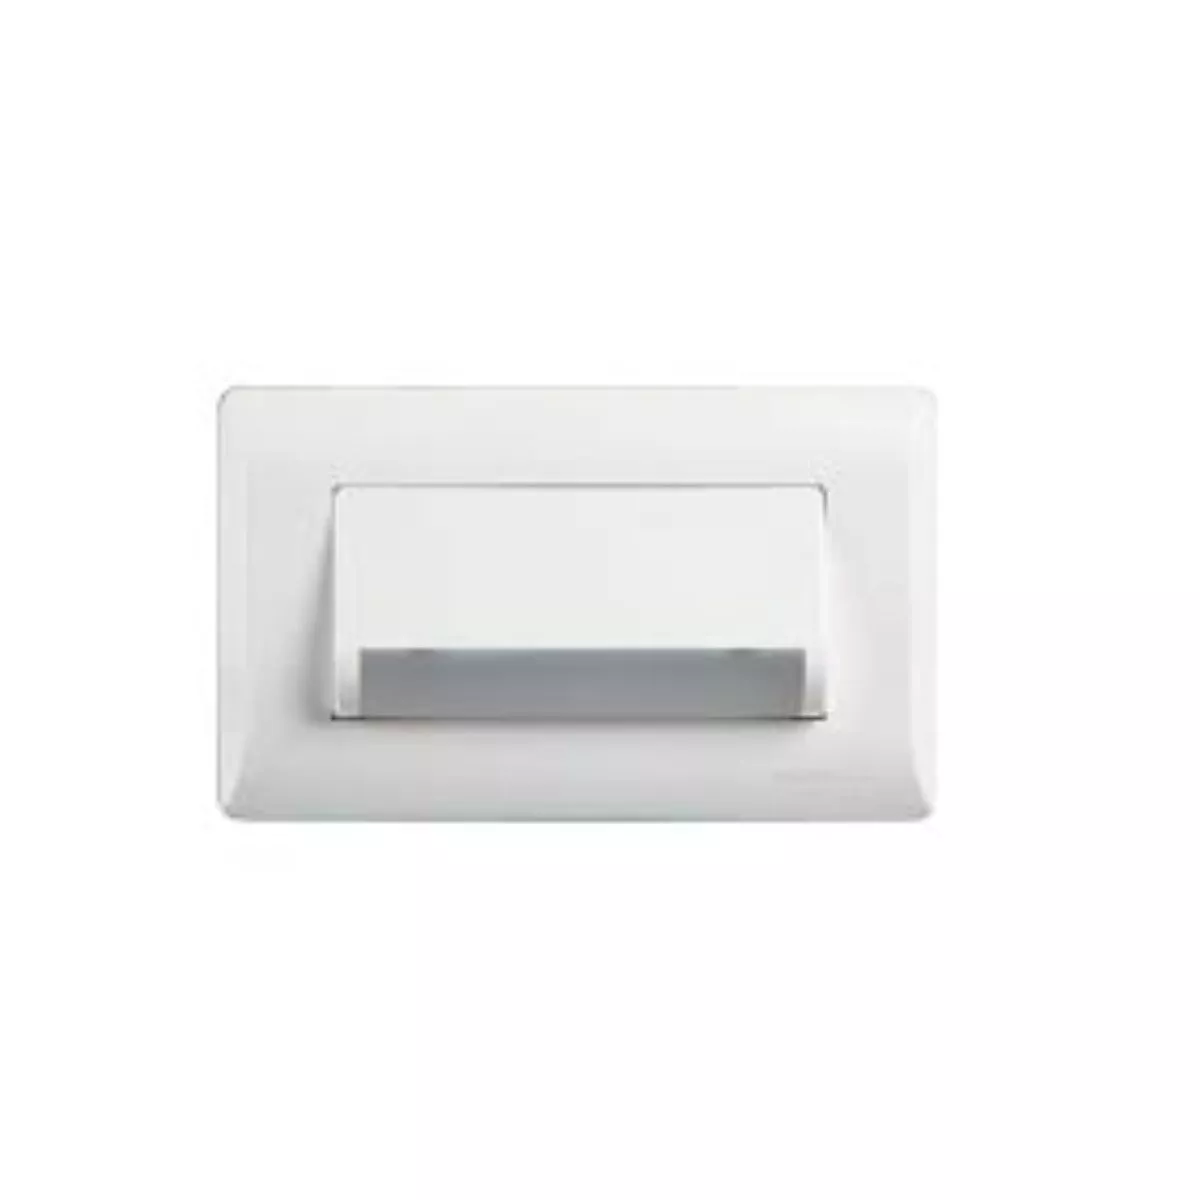 Havells Coral LED Footlight 4M Support Modules Warm White - ElectricBasket